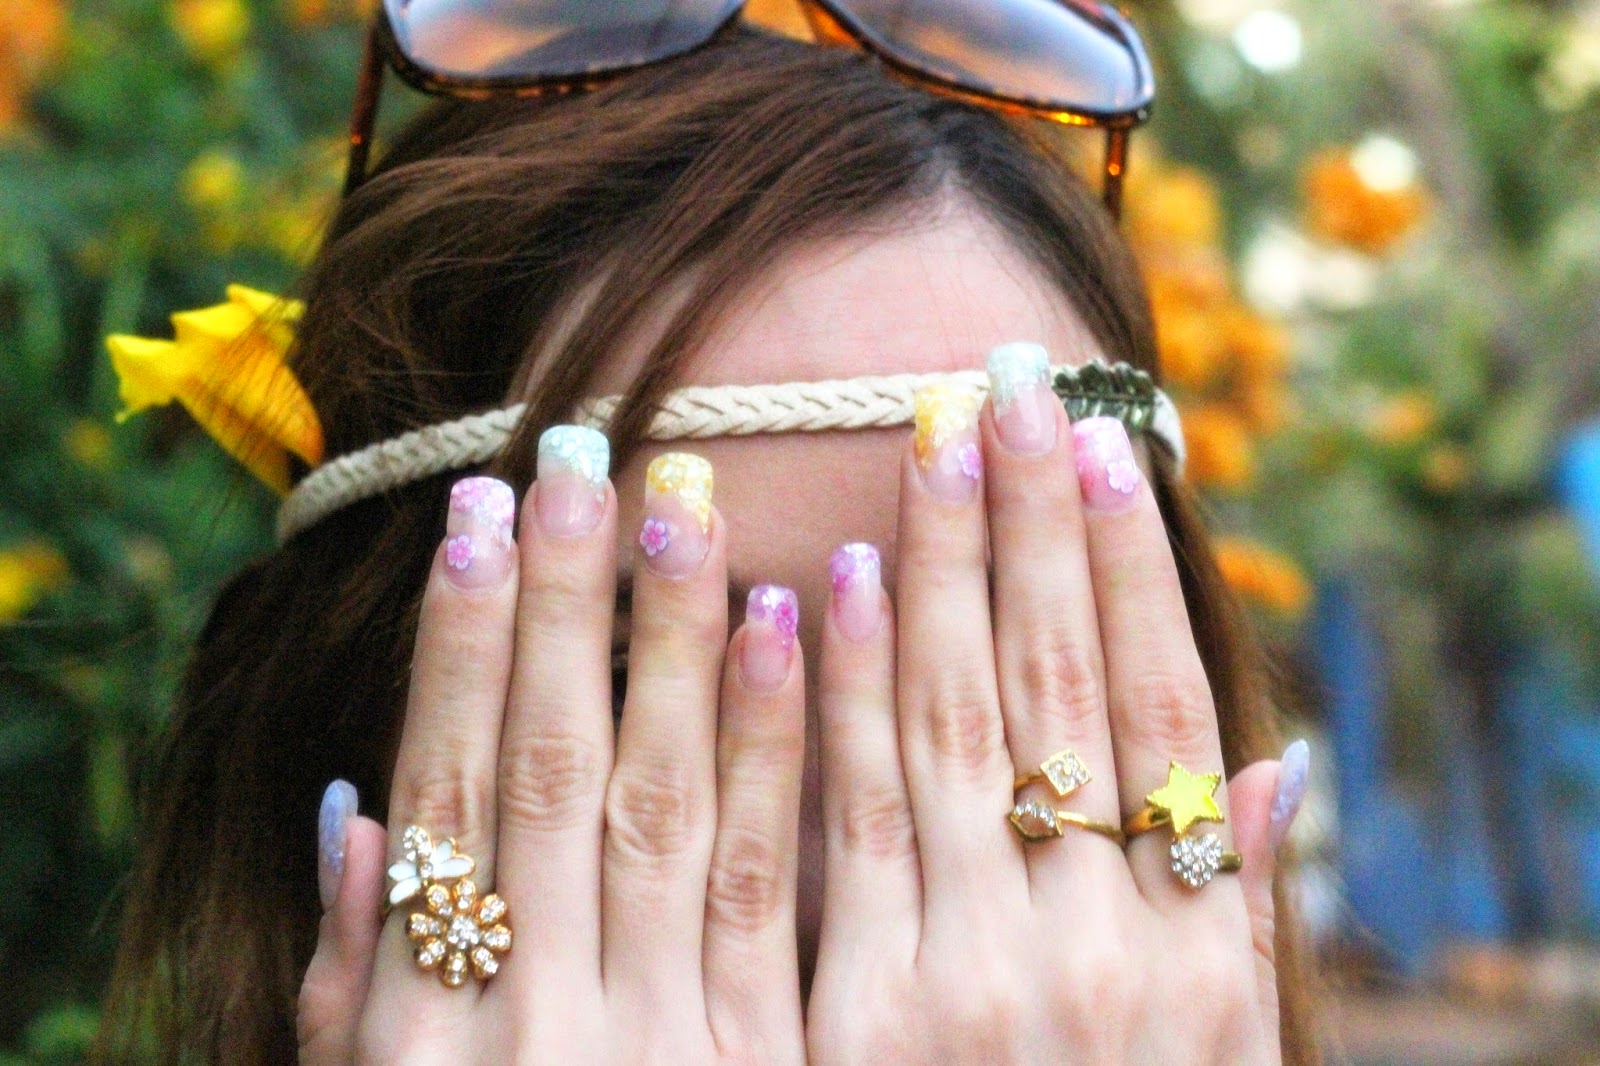 Multi-colour Manicure with charm rings